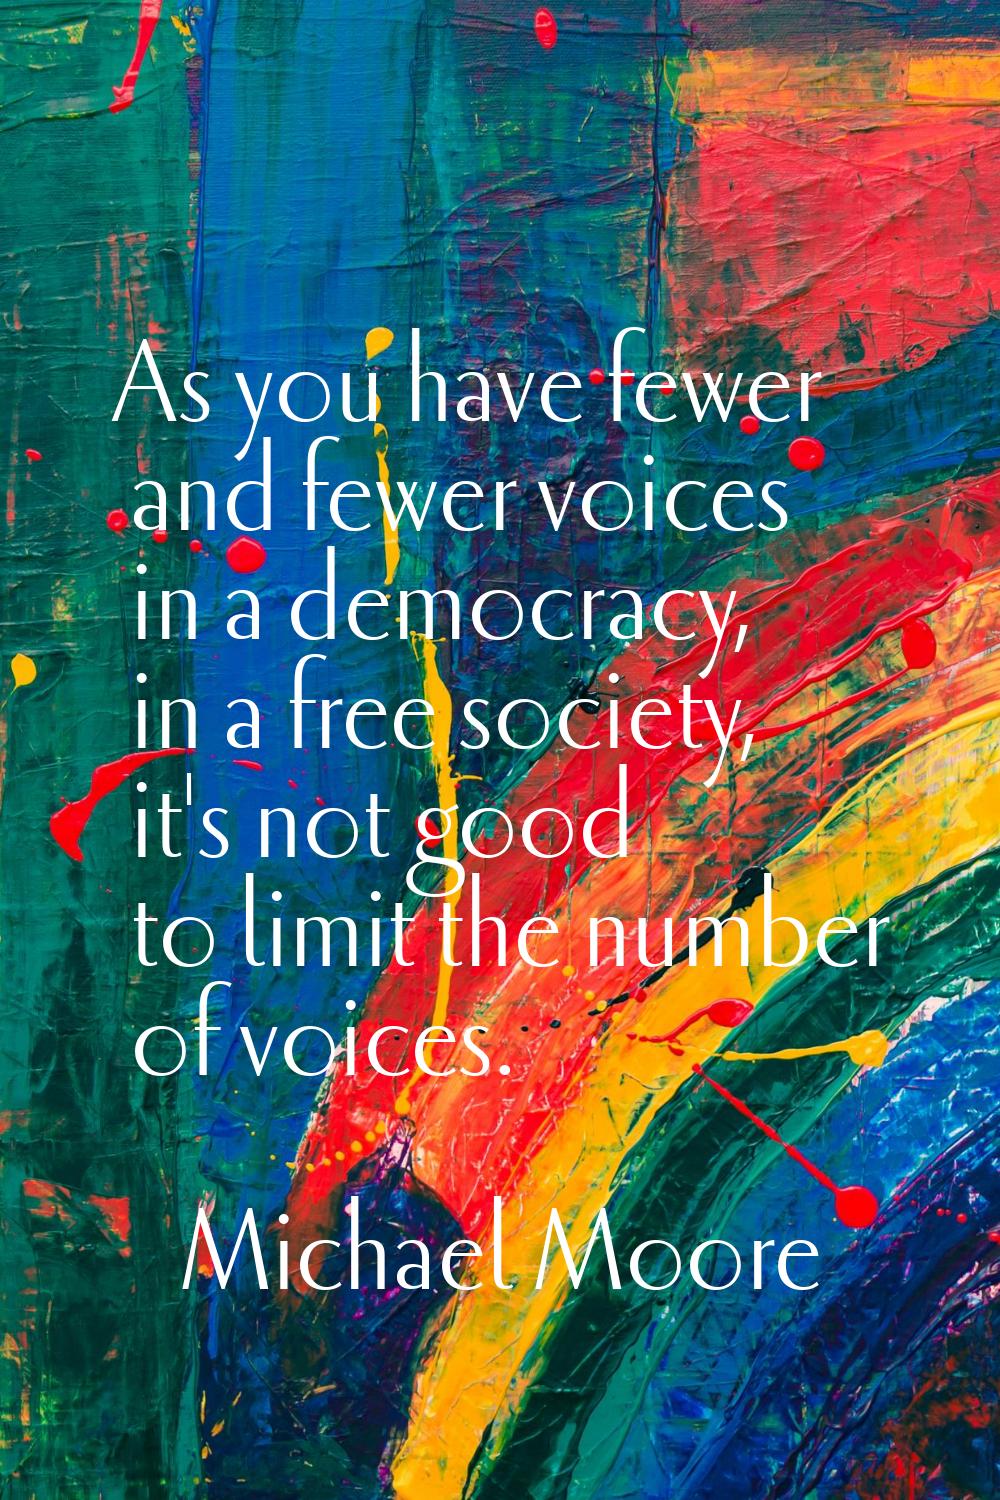 As you have fewer and fewer voices in a democracy, in a free society, it's not good to limit the nu